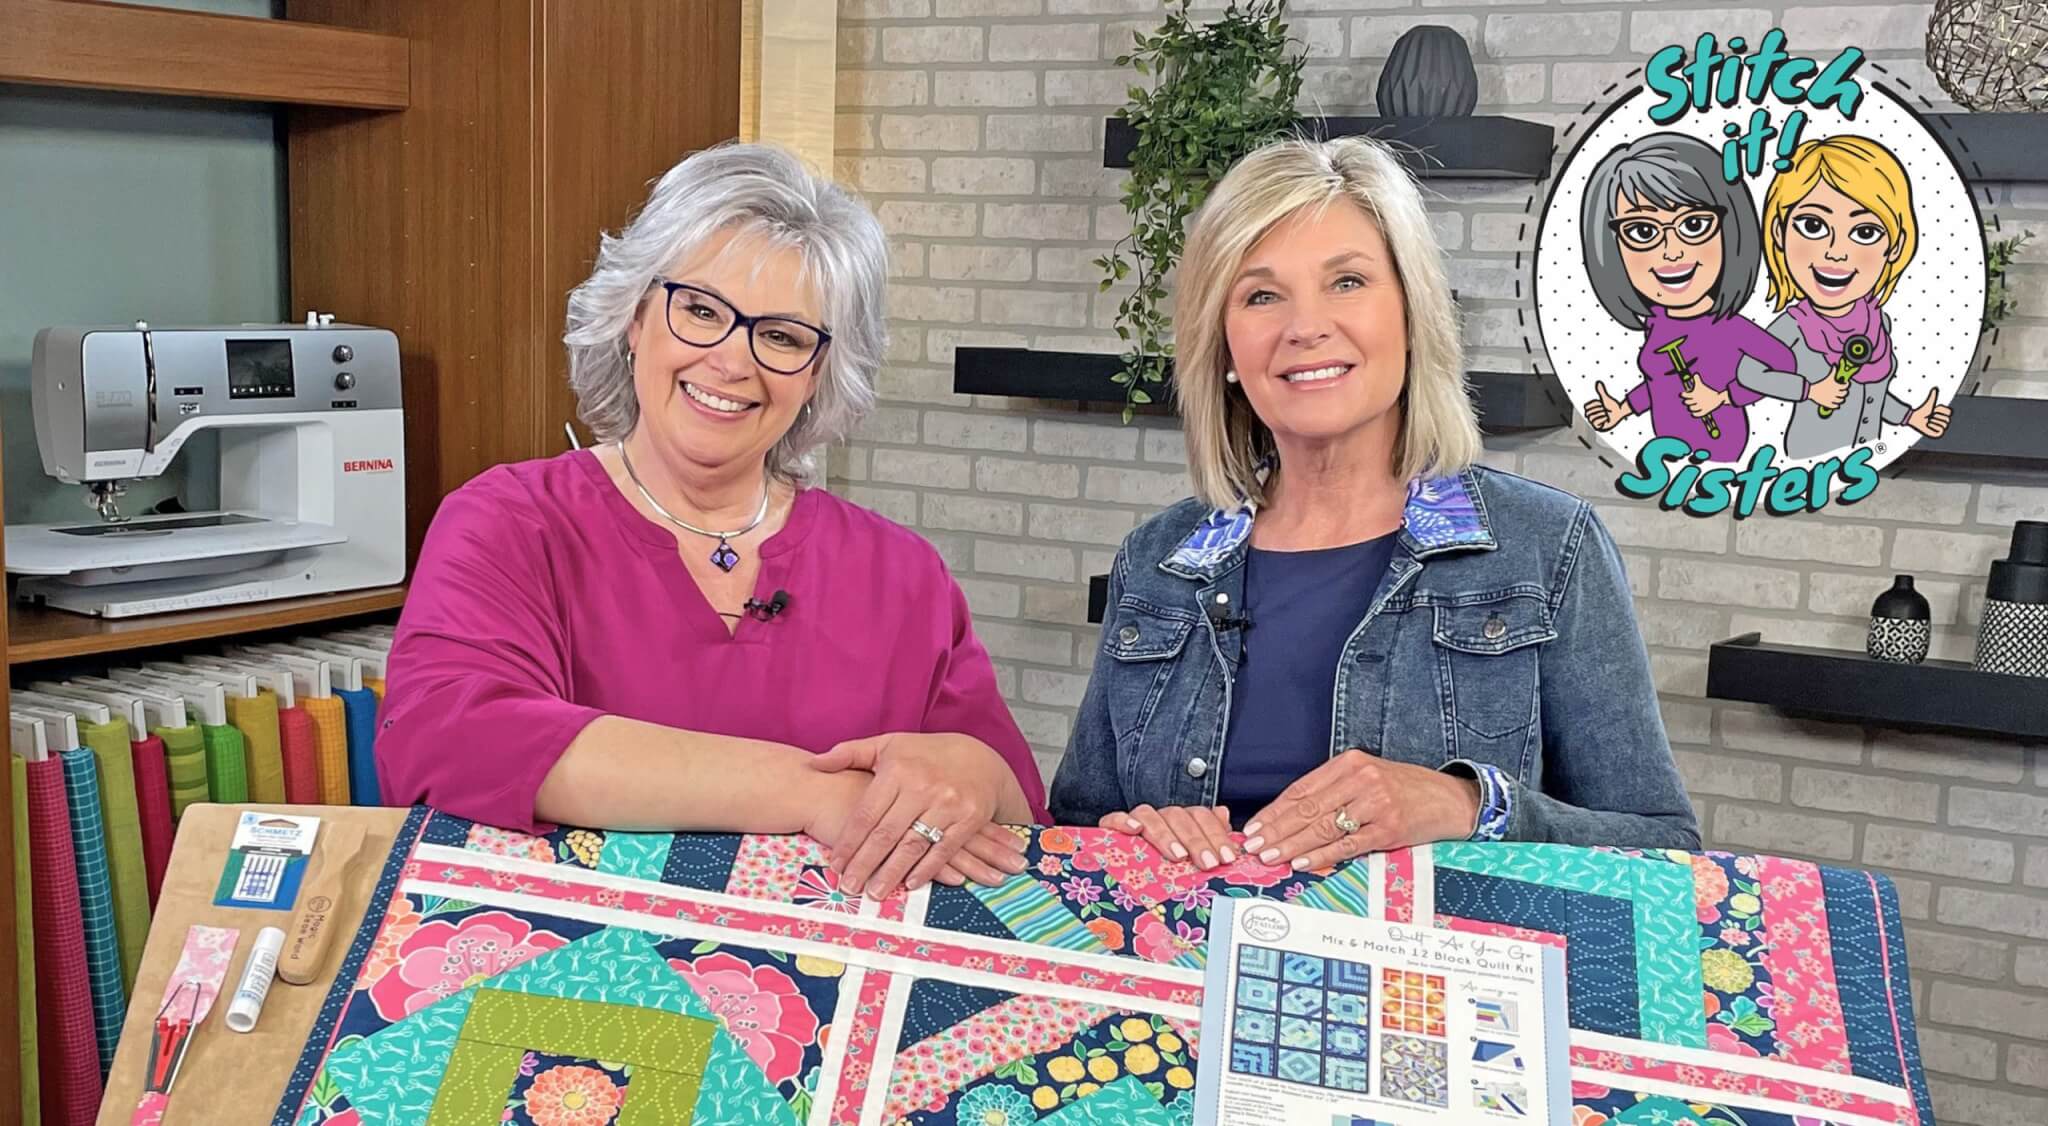 Deanna Springer and guest Jill Repp on the set of Stitch it! Sisters Quilt As You Go Mix and Match 12 Block Quilt at The Nancy Zieman Productions Blog